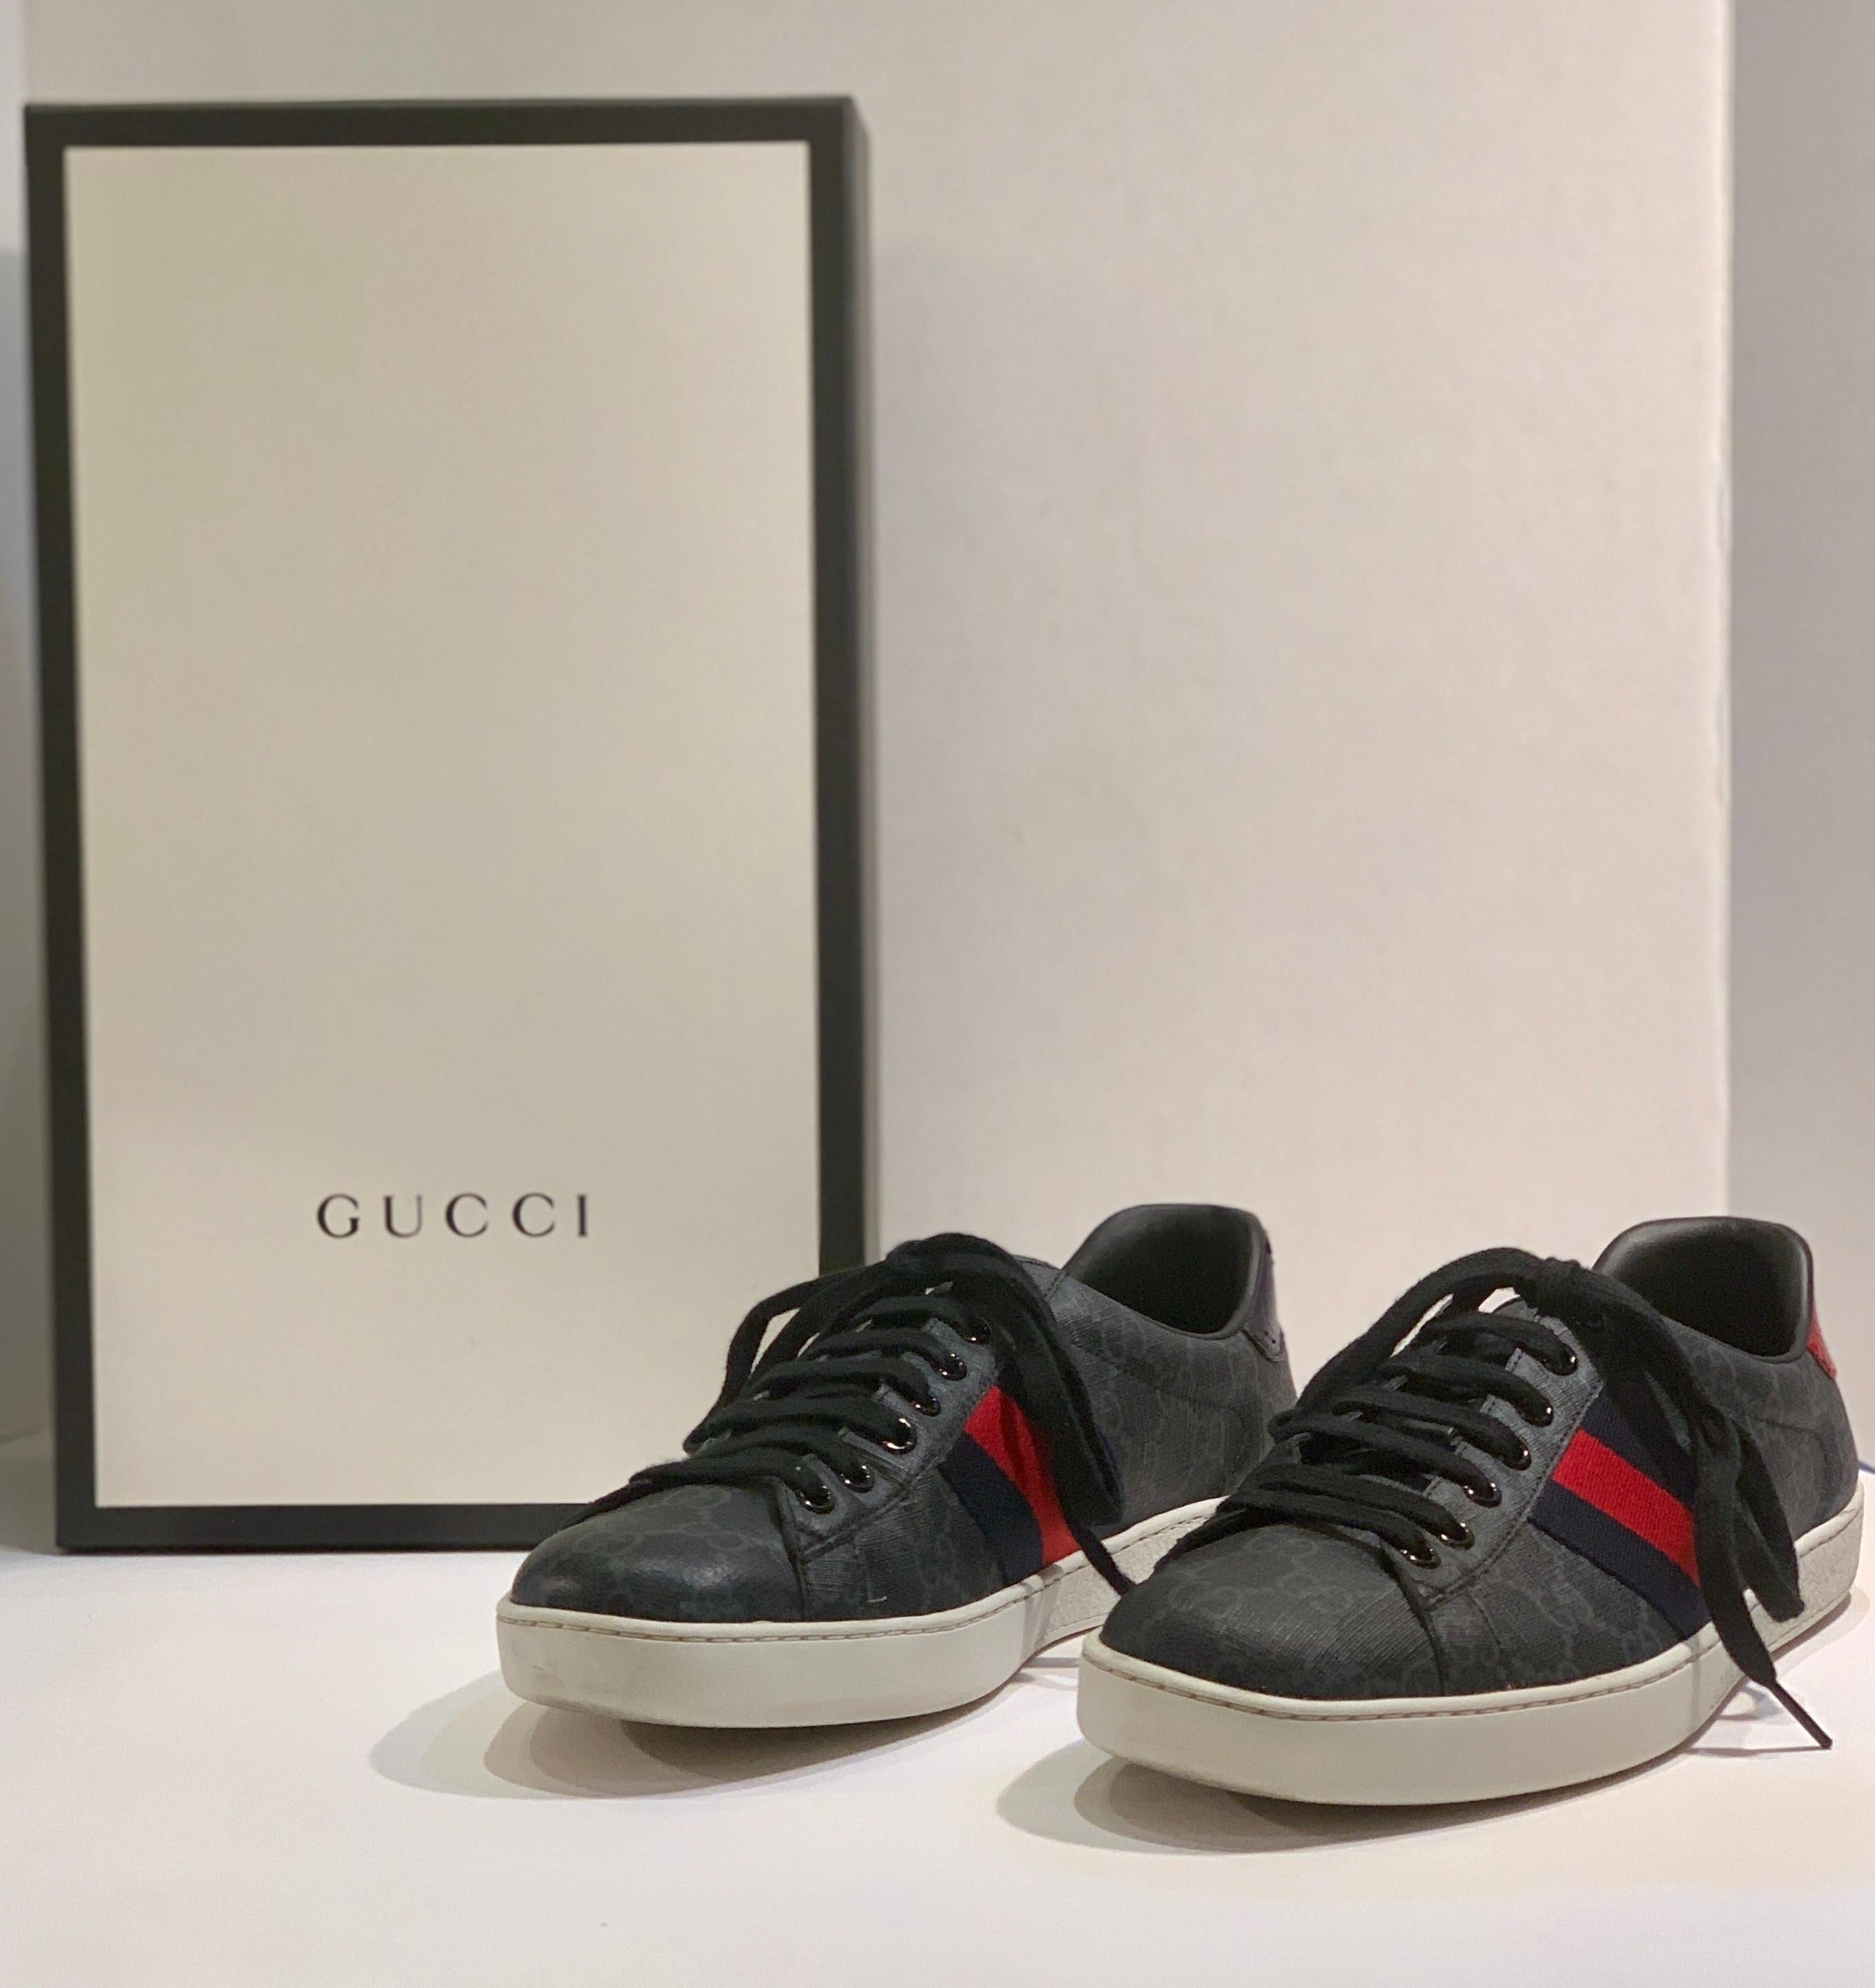 GUCCI Ace GG Supreme Sneakers are a men's size 7 or a women's size 9 shoe, described on the GUCCI website as, “The retro inspired design of the Ace sneaker is crafted in GG Supreme canvas in black and grey. First used in the 1970s, the GG logo was